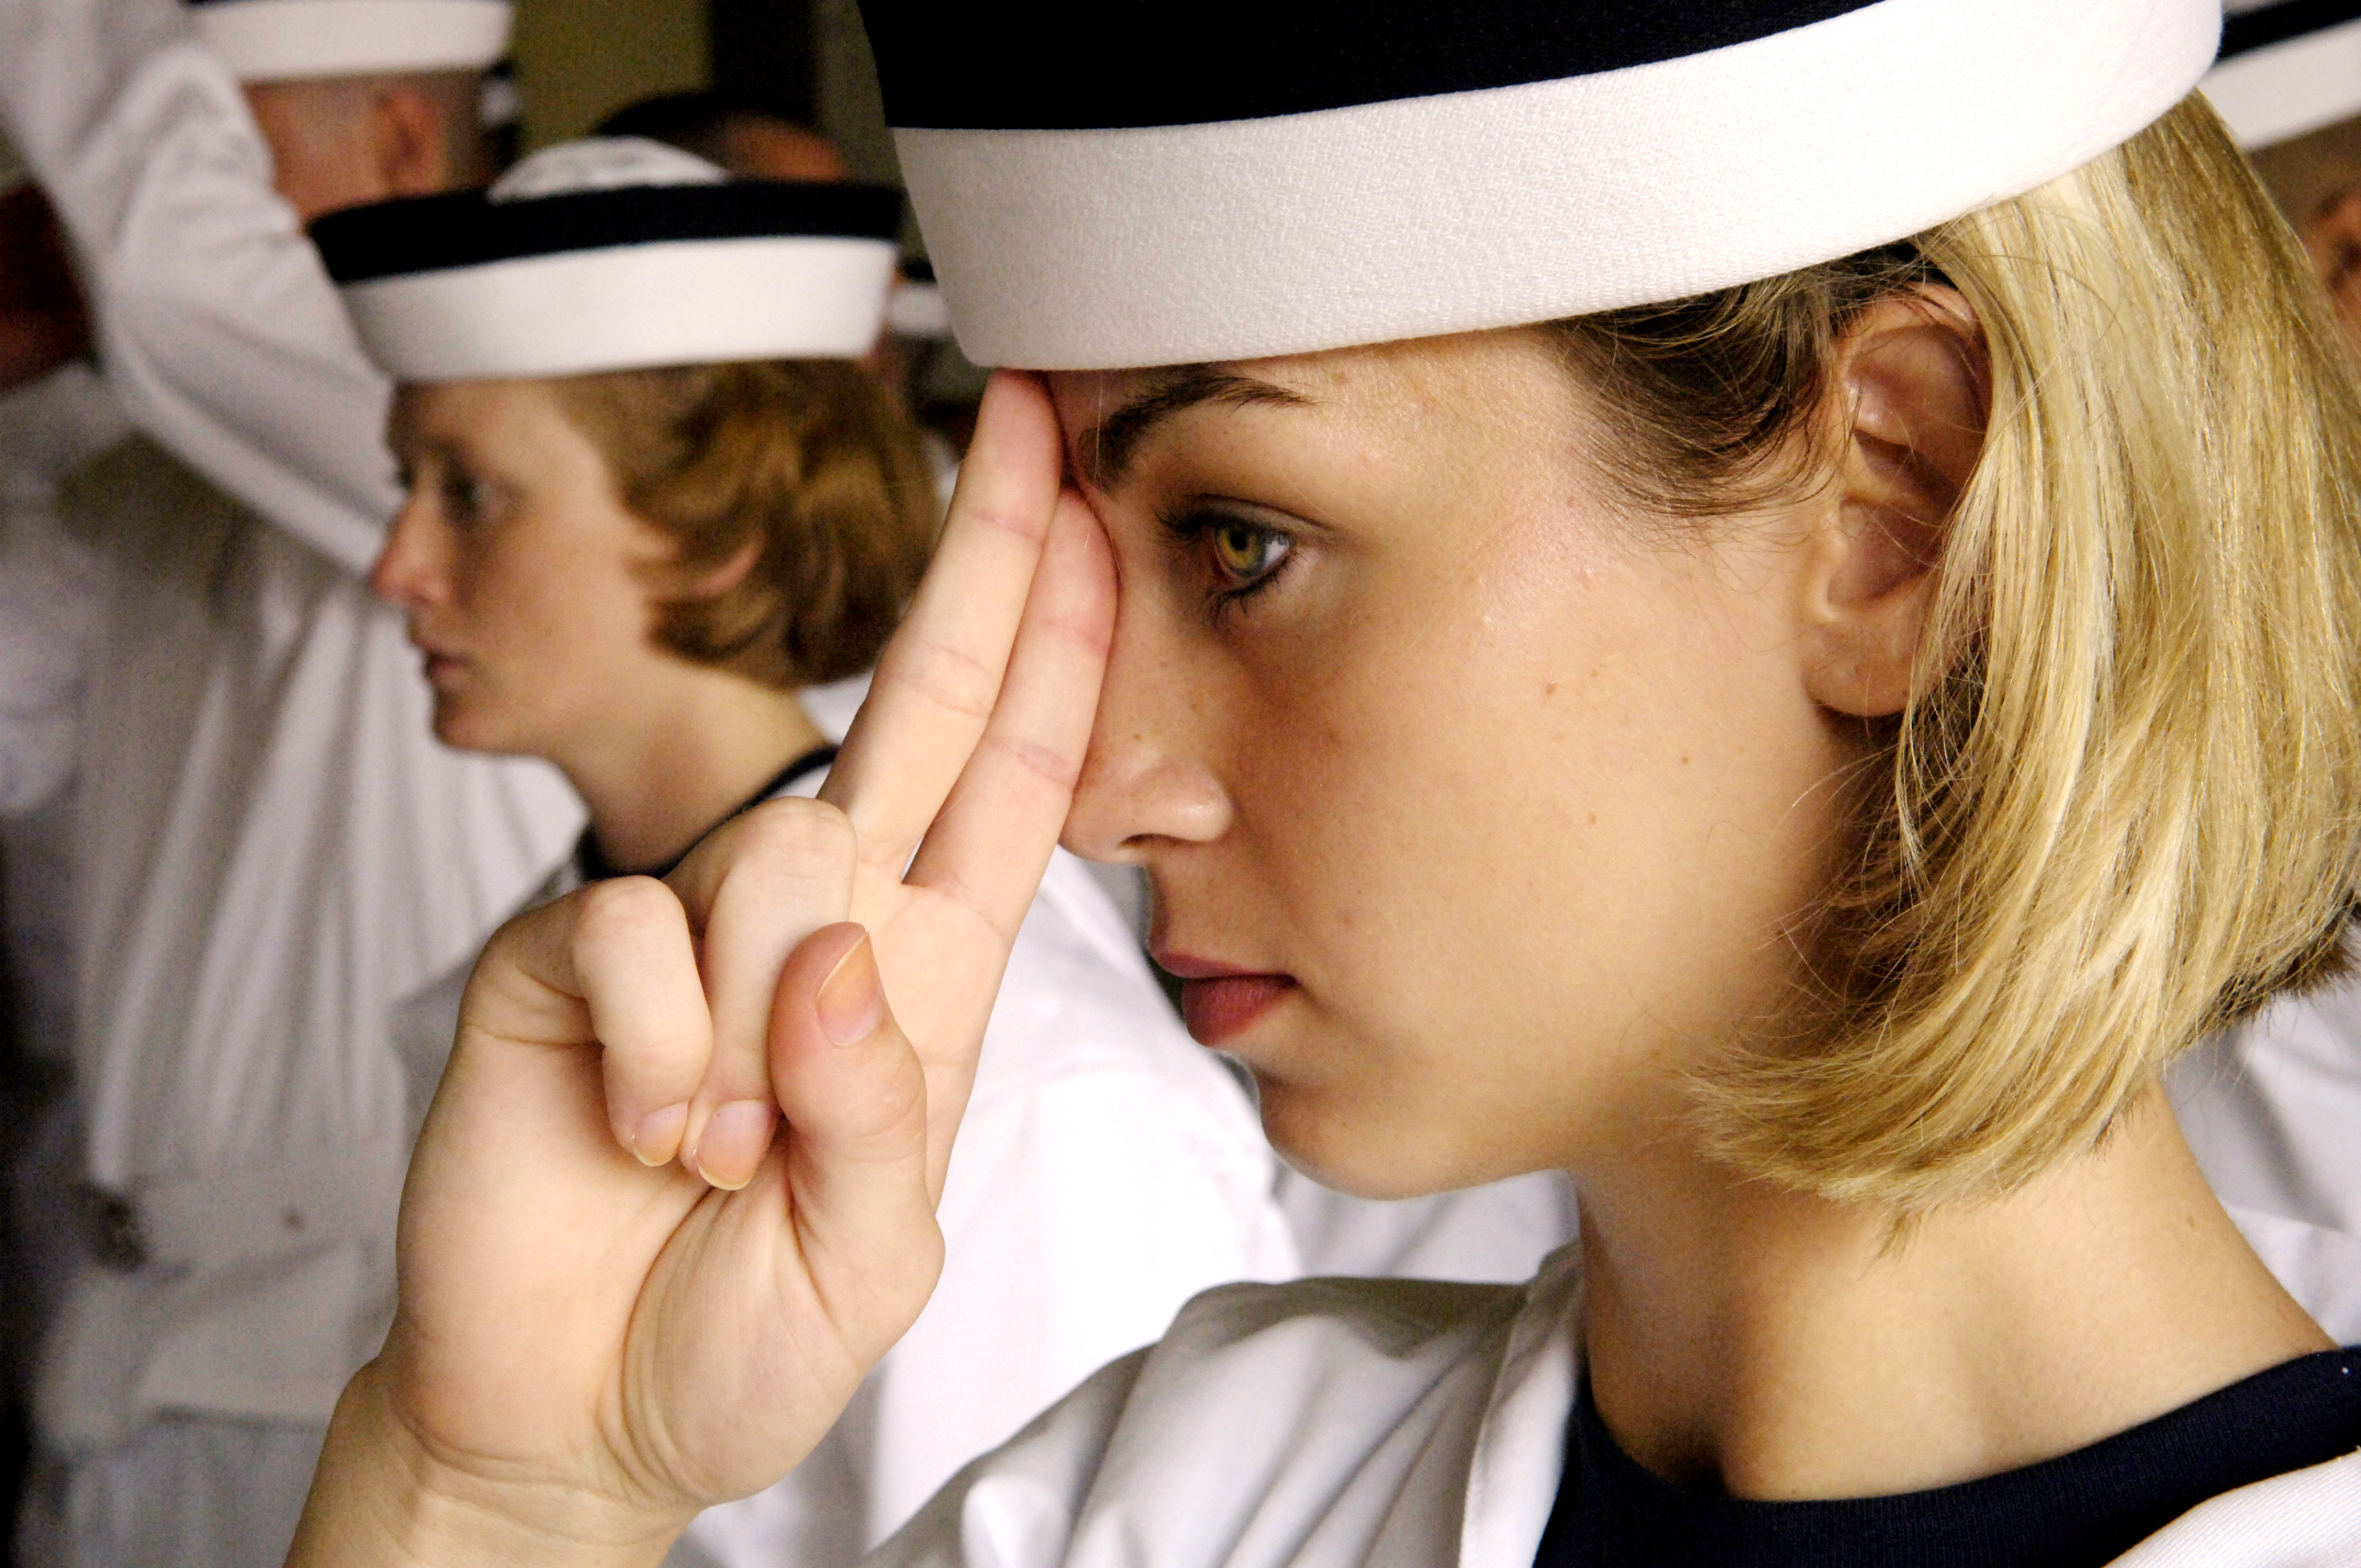 US Navy 070627-N-9241M-130 Ashley Bucholz is taught how to properly wear her cover. The cover should rest two fingers above the top of her nose